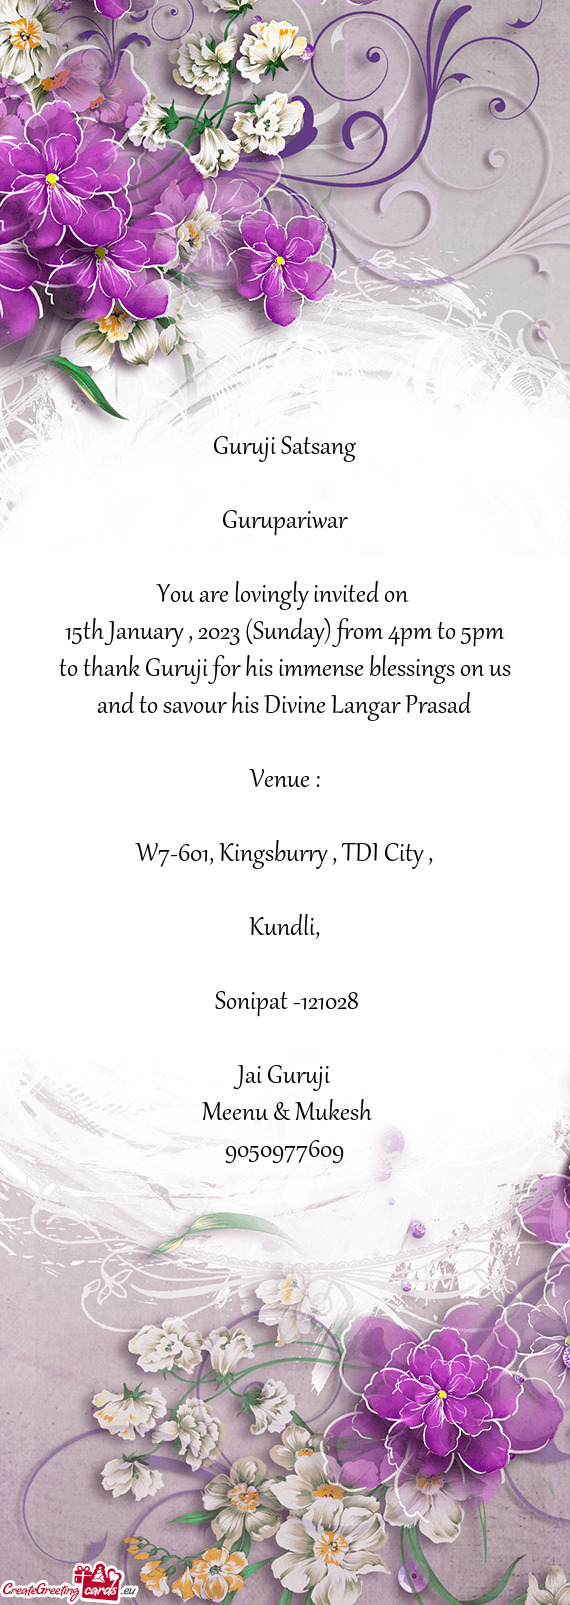 15th January , 2023 (Sunday) from 4pm to 5pm